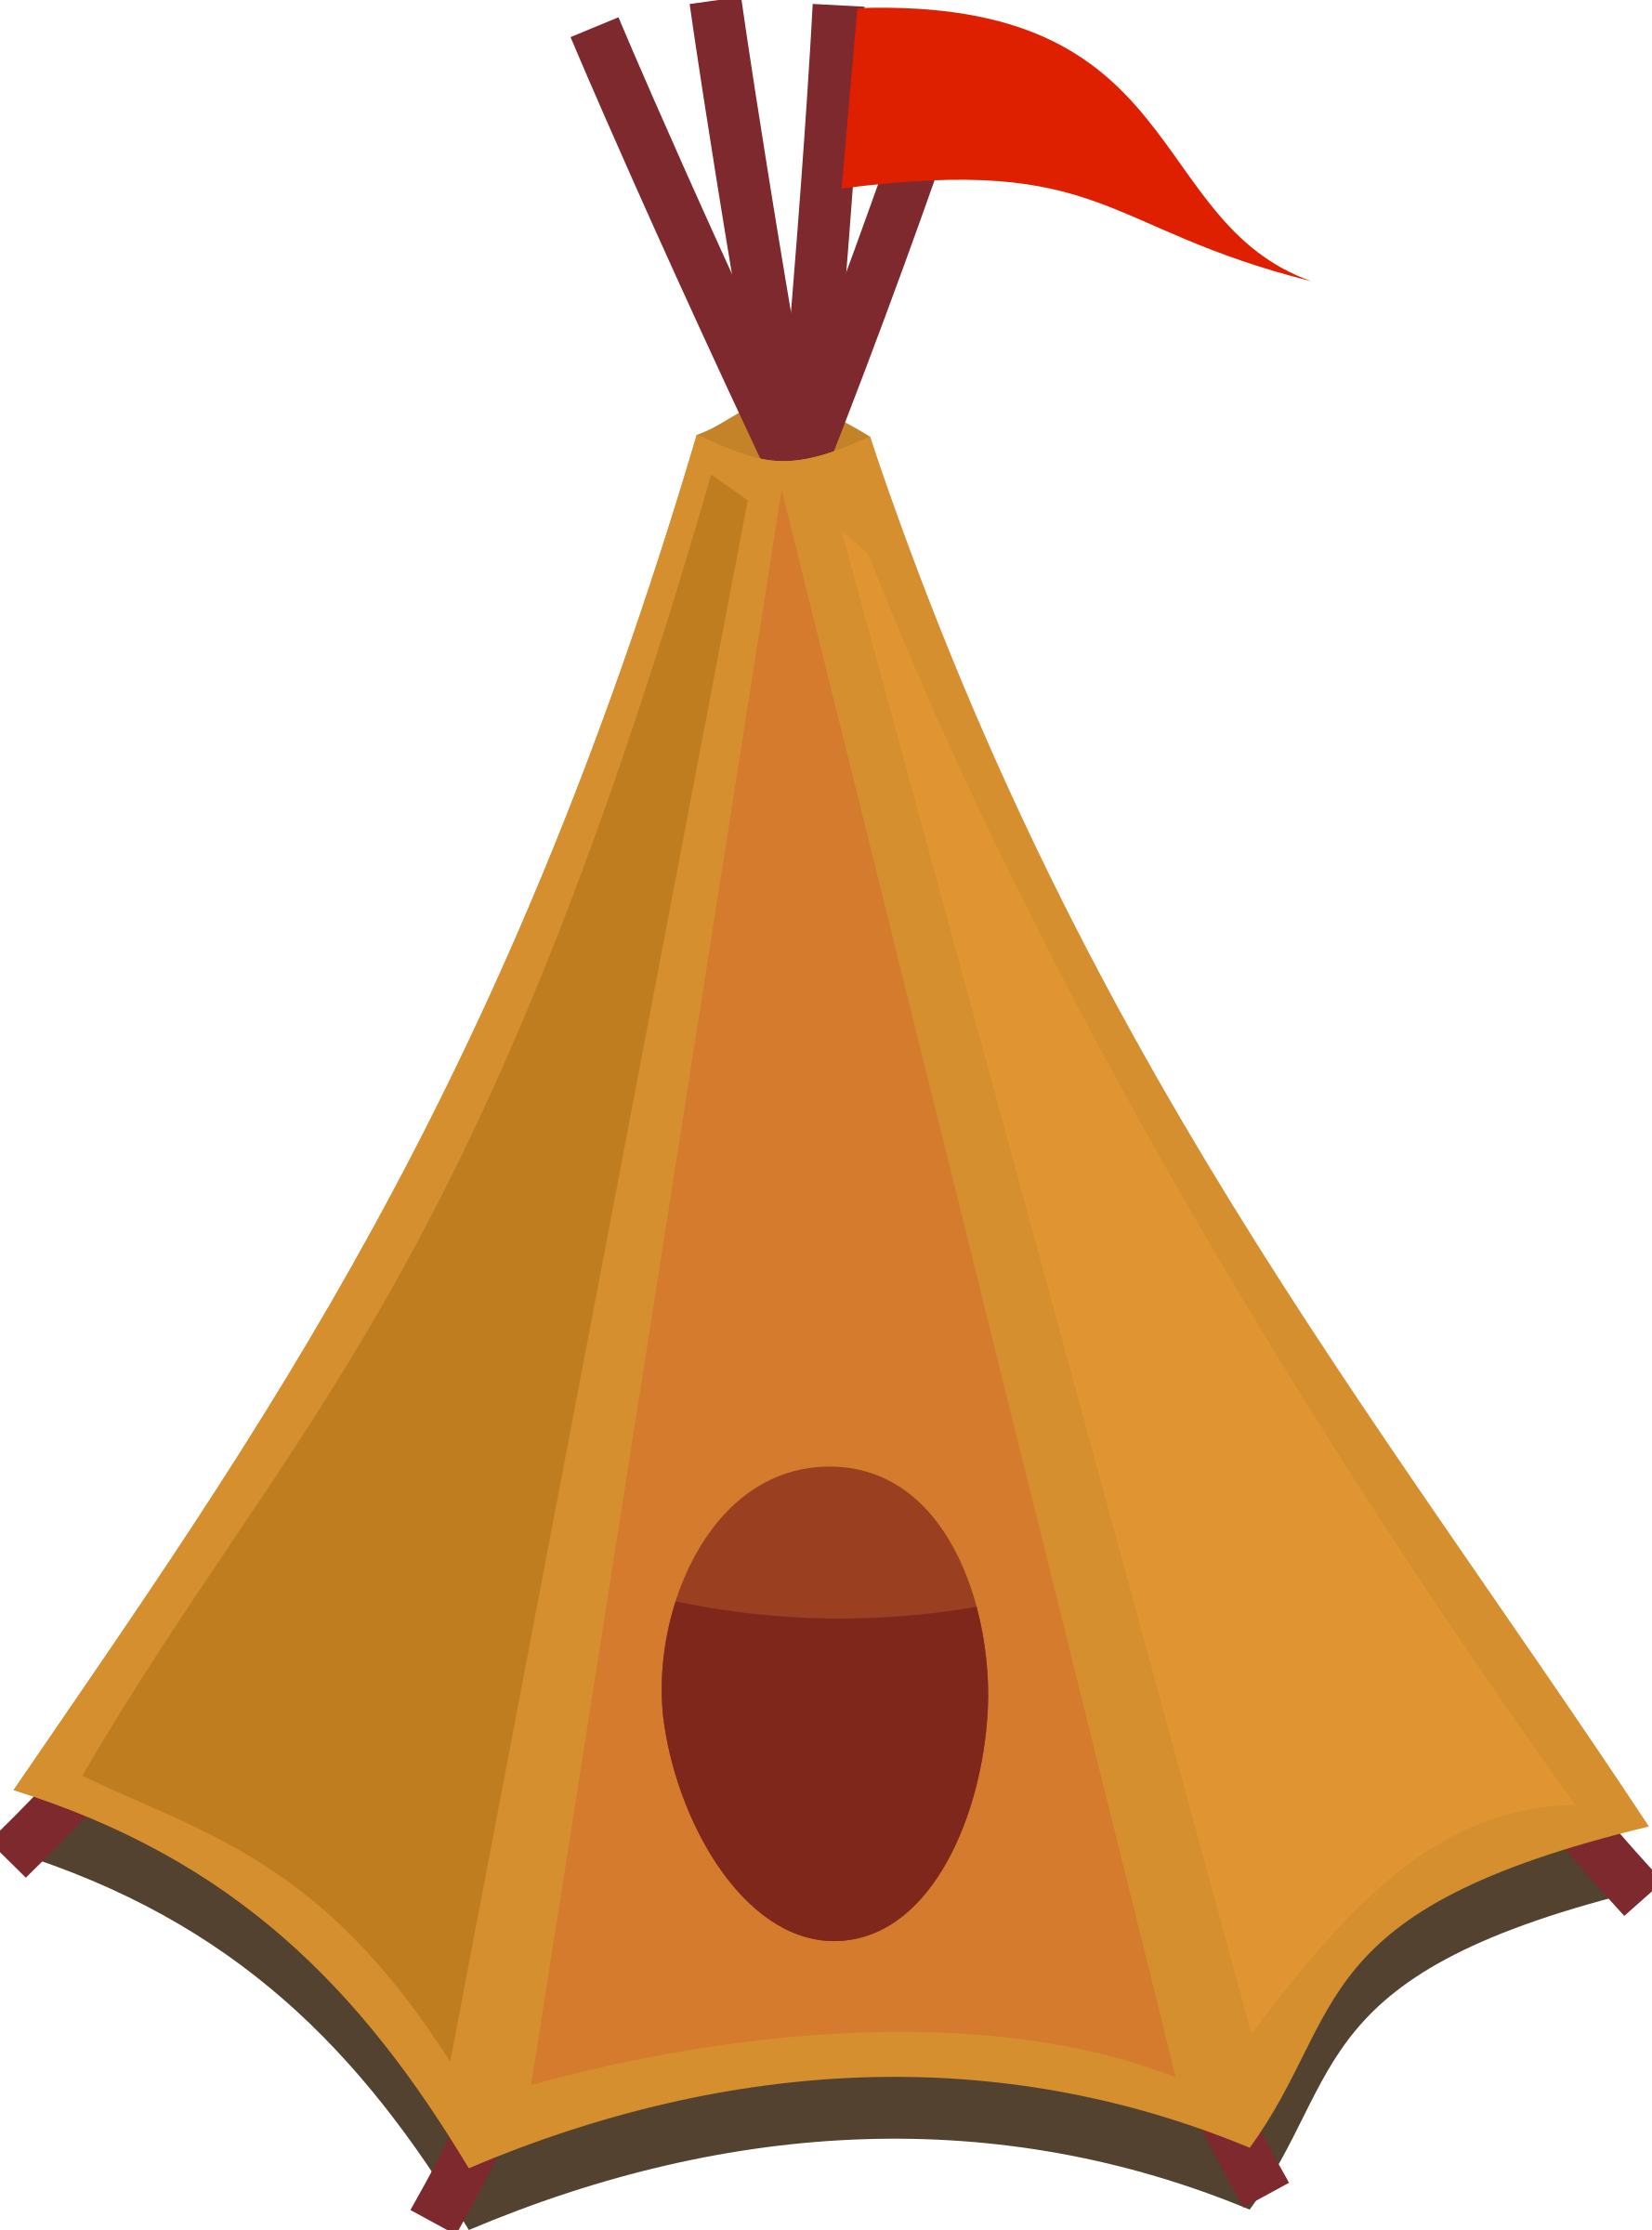 Clipart - Cartoon tipi / tent with red flag